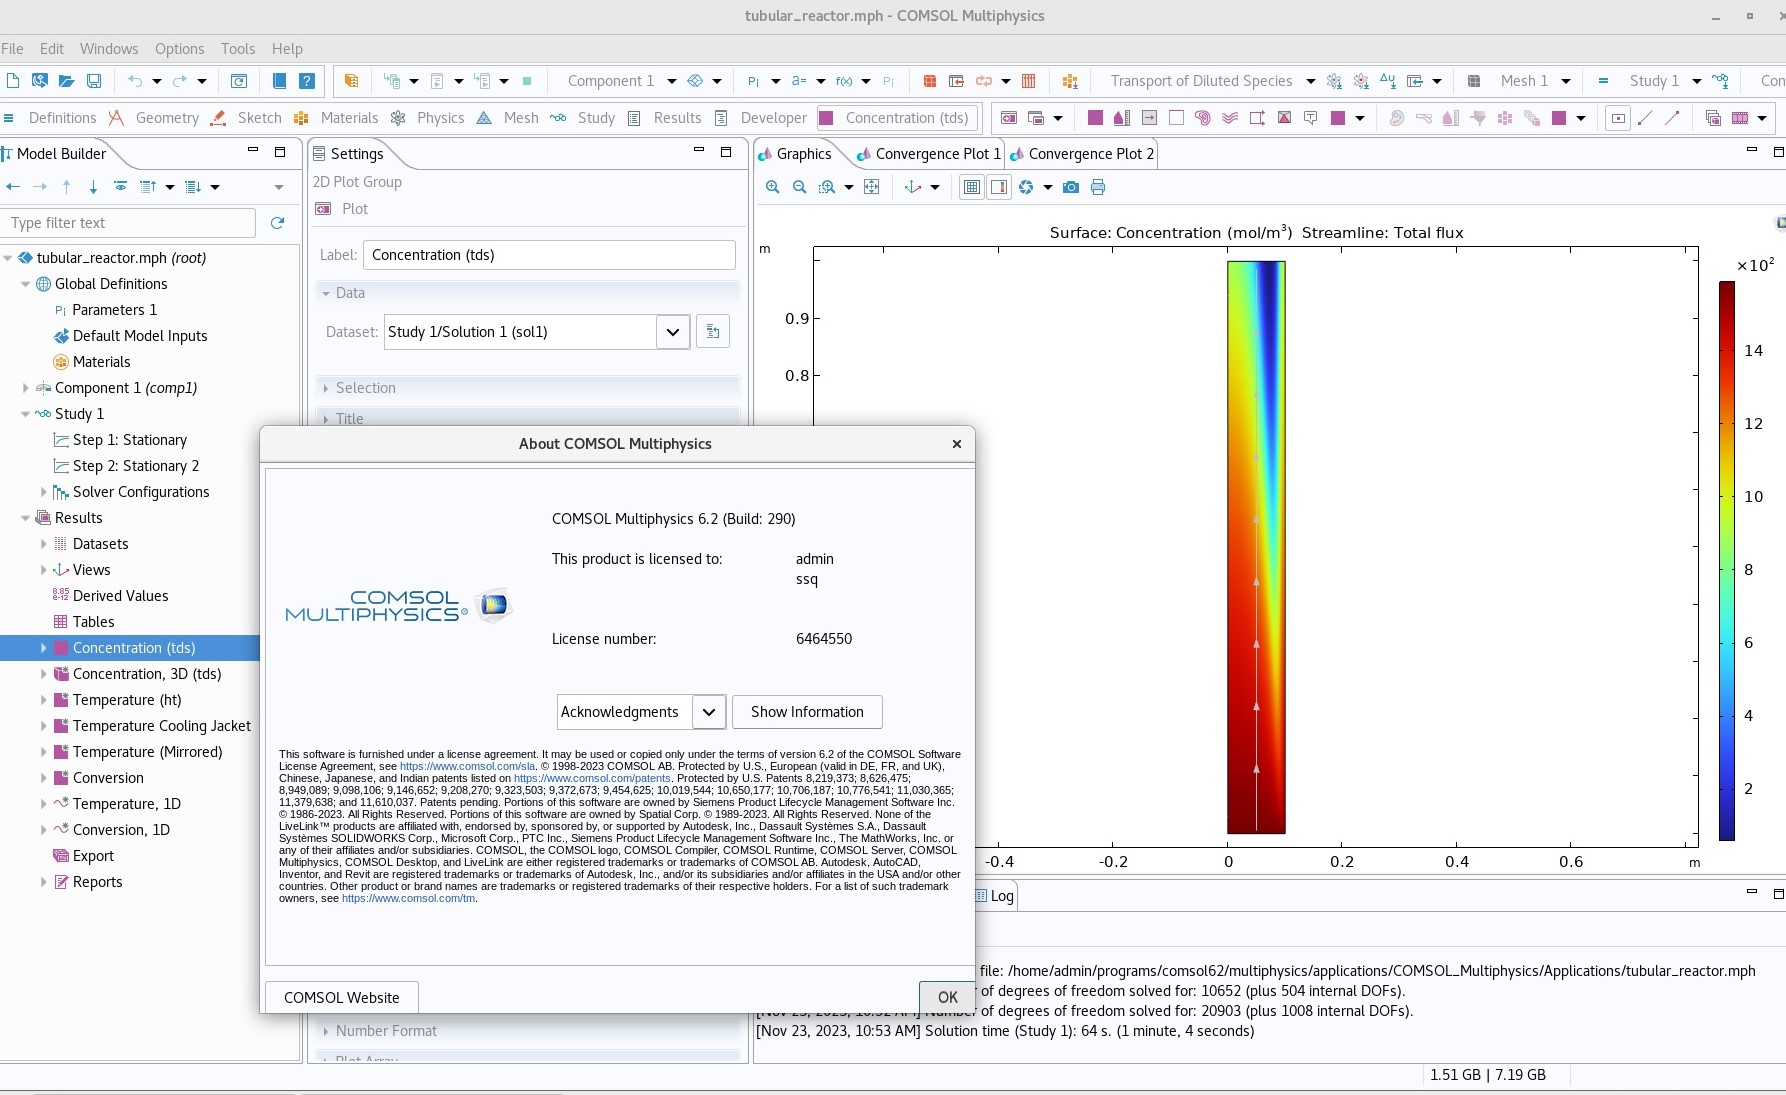 Working with Comsol Multiphysics 6.2 Build 290 full license